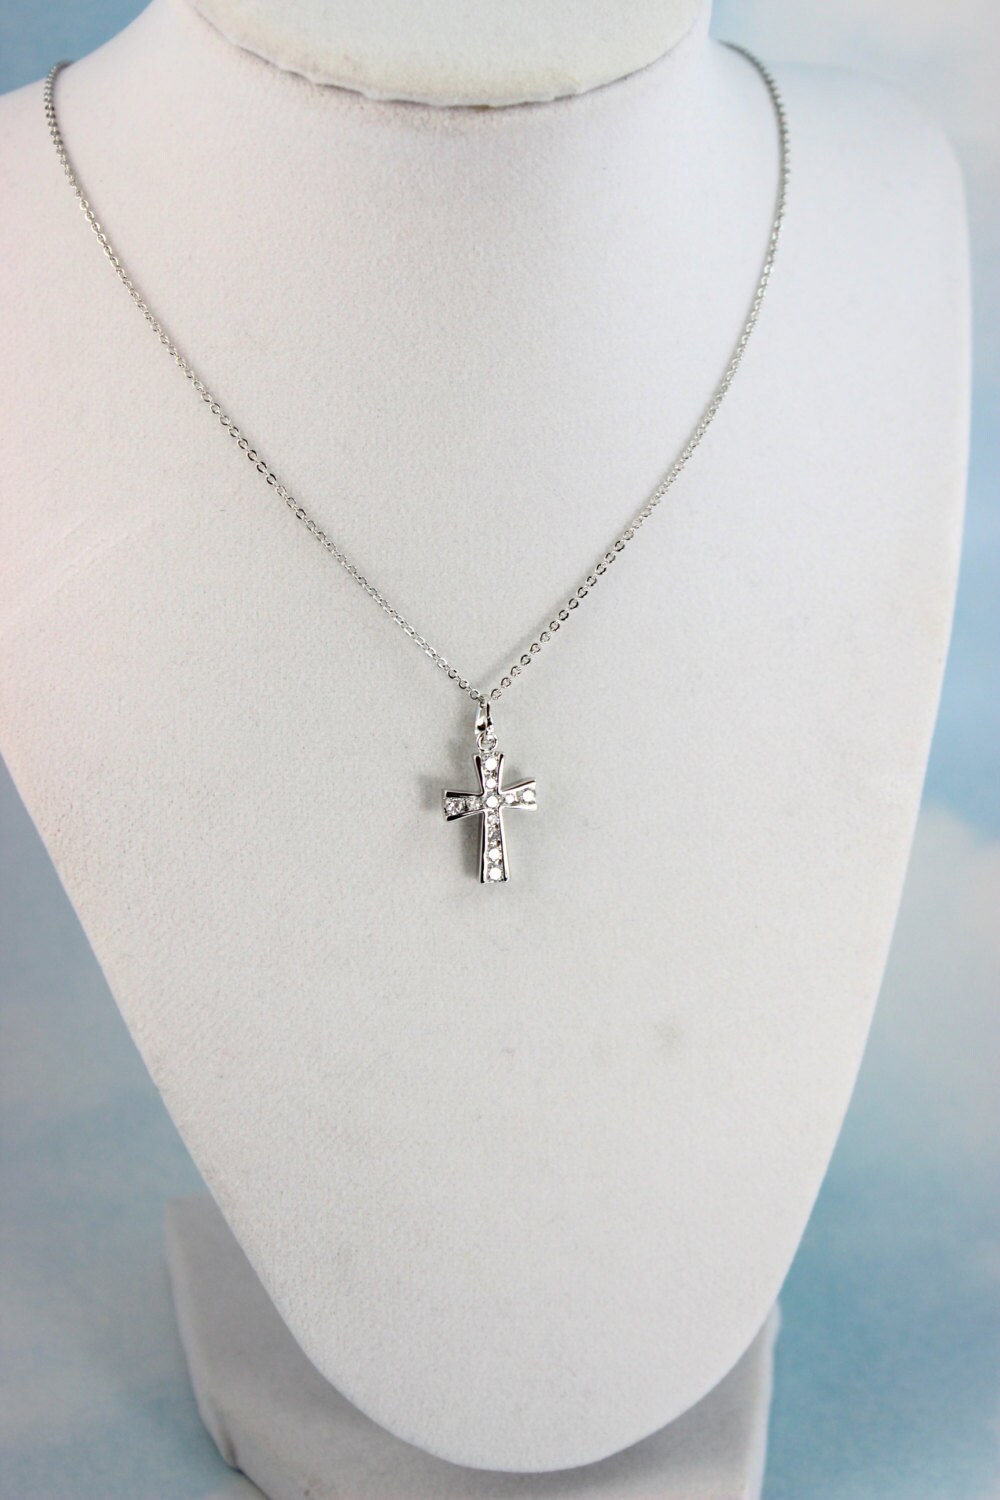 Elegant 18k 18CT White Gold Filled GF Crystal Cross Pendant Necklace N-A868 Gift